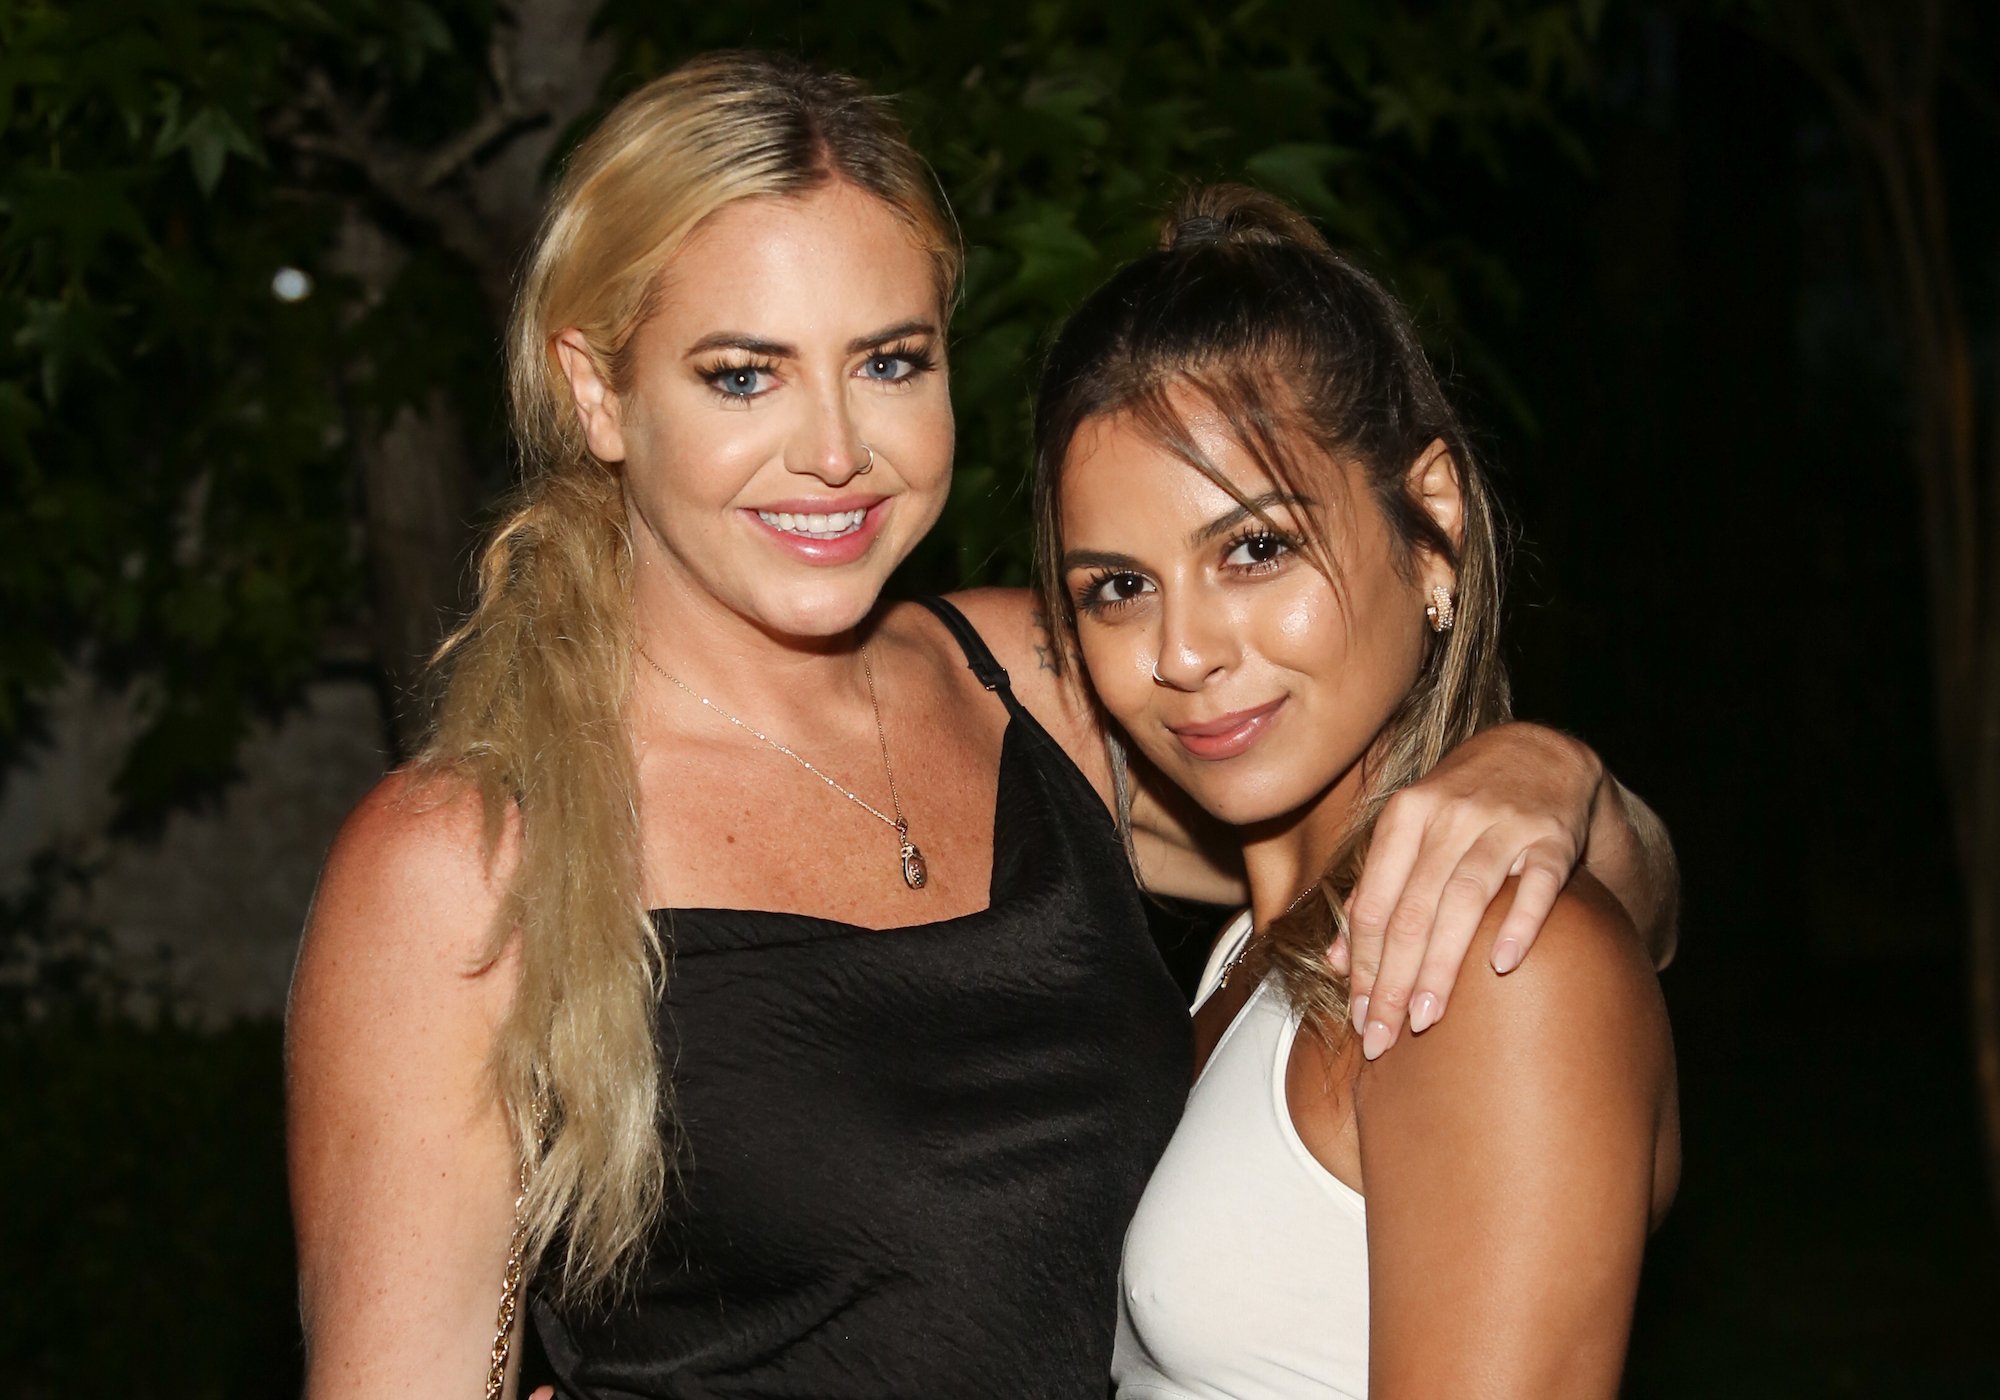 Jemmye Carroll (L) standing with her arm around Amber Martinez at the Reality Rushmore: Paramount+ MTV's 'The Challenge' reunion